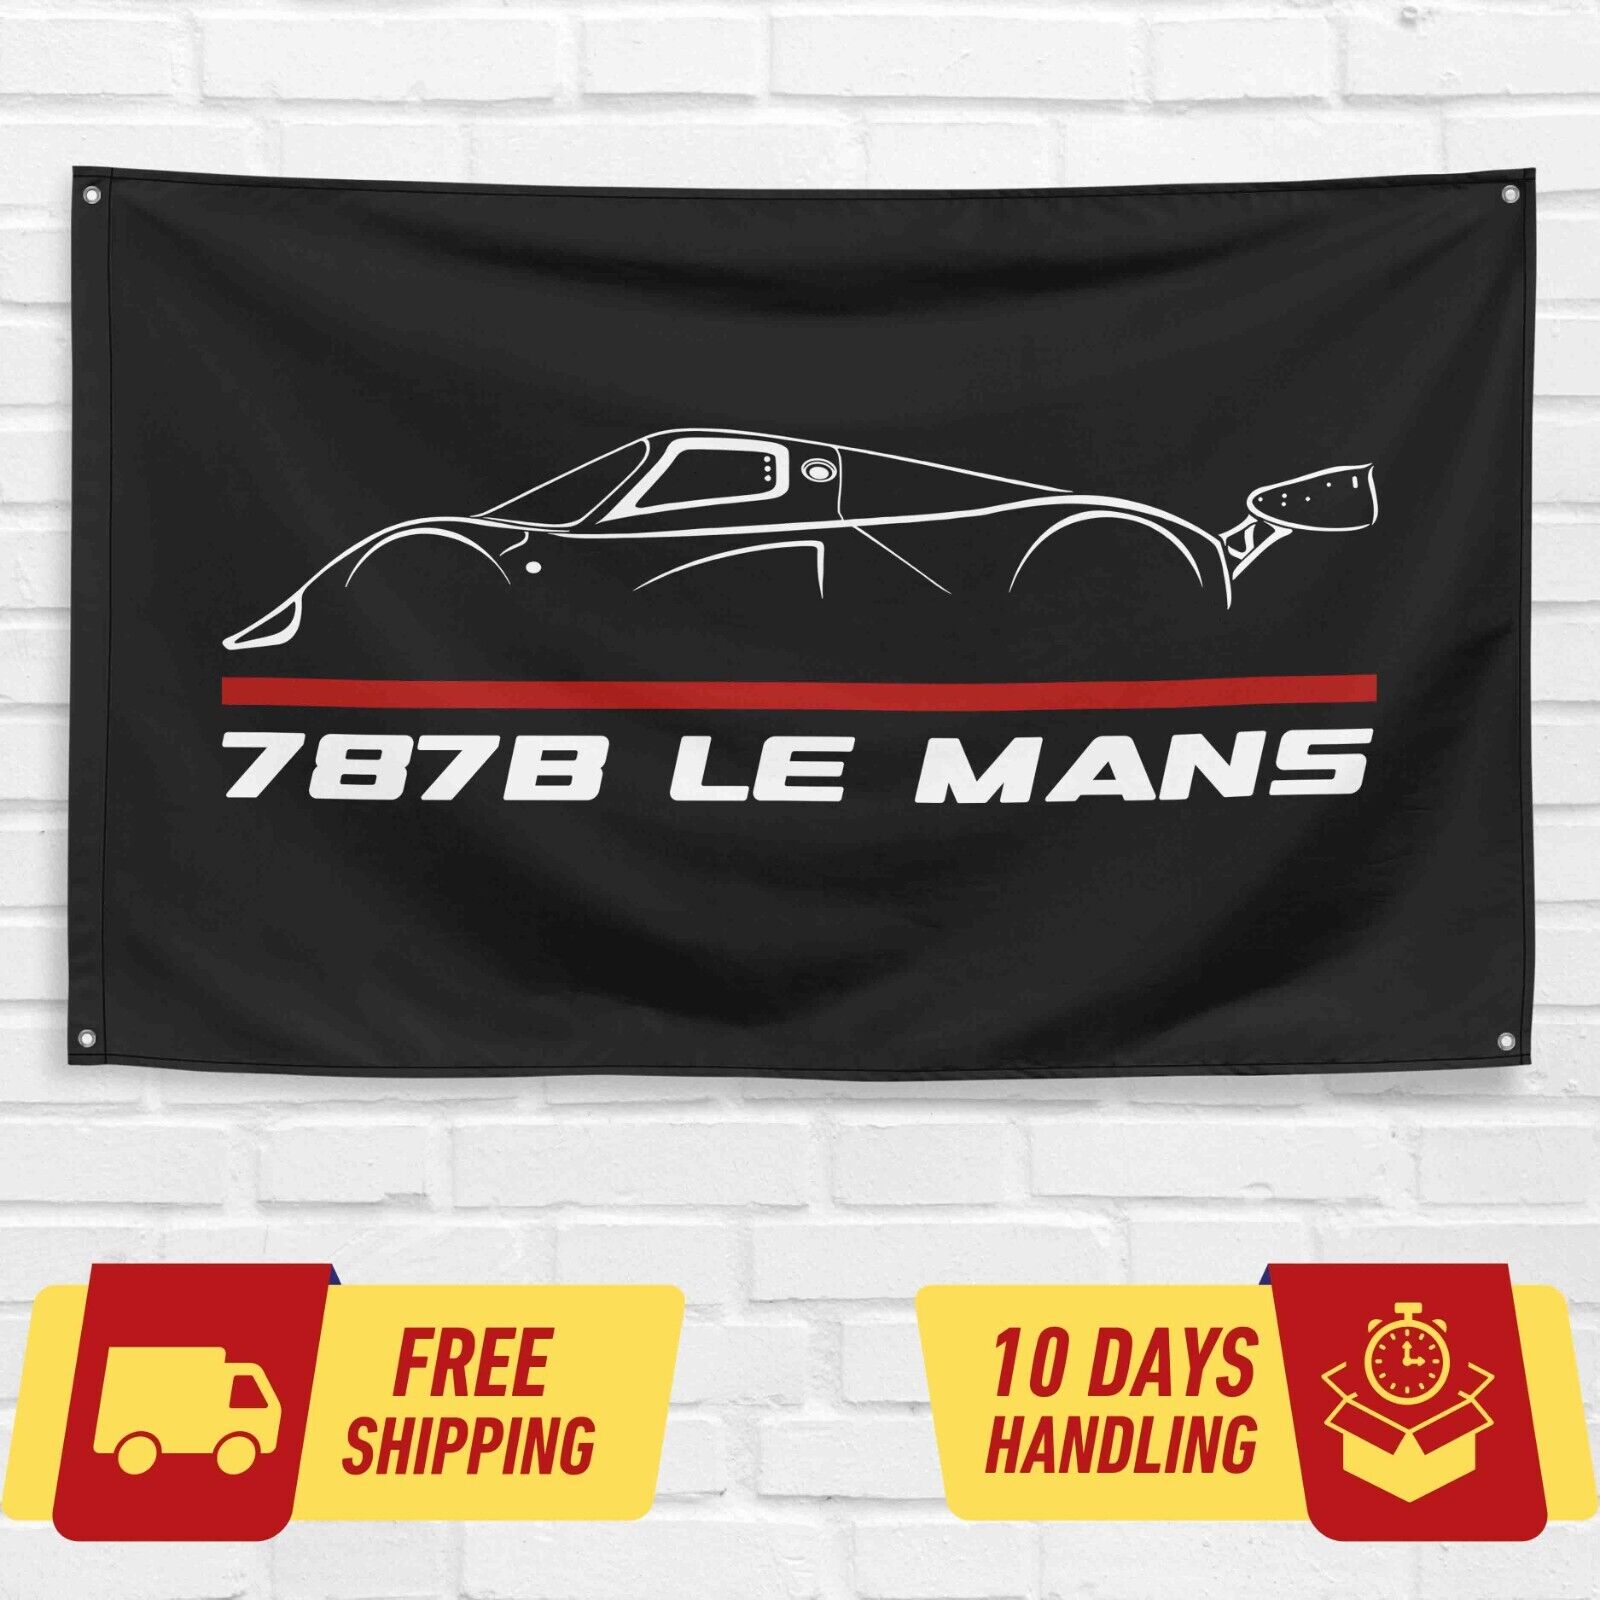 For Mazda 787B Le Mans Race Car Enthusiast 3x5 ft Flag Birthday Gift Banner